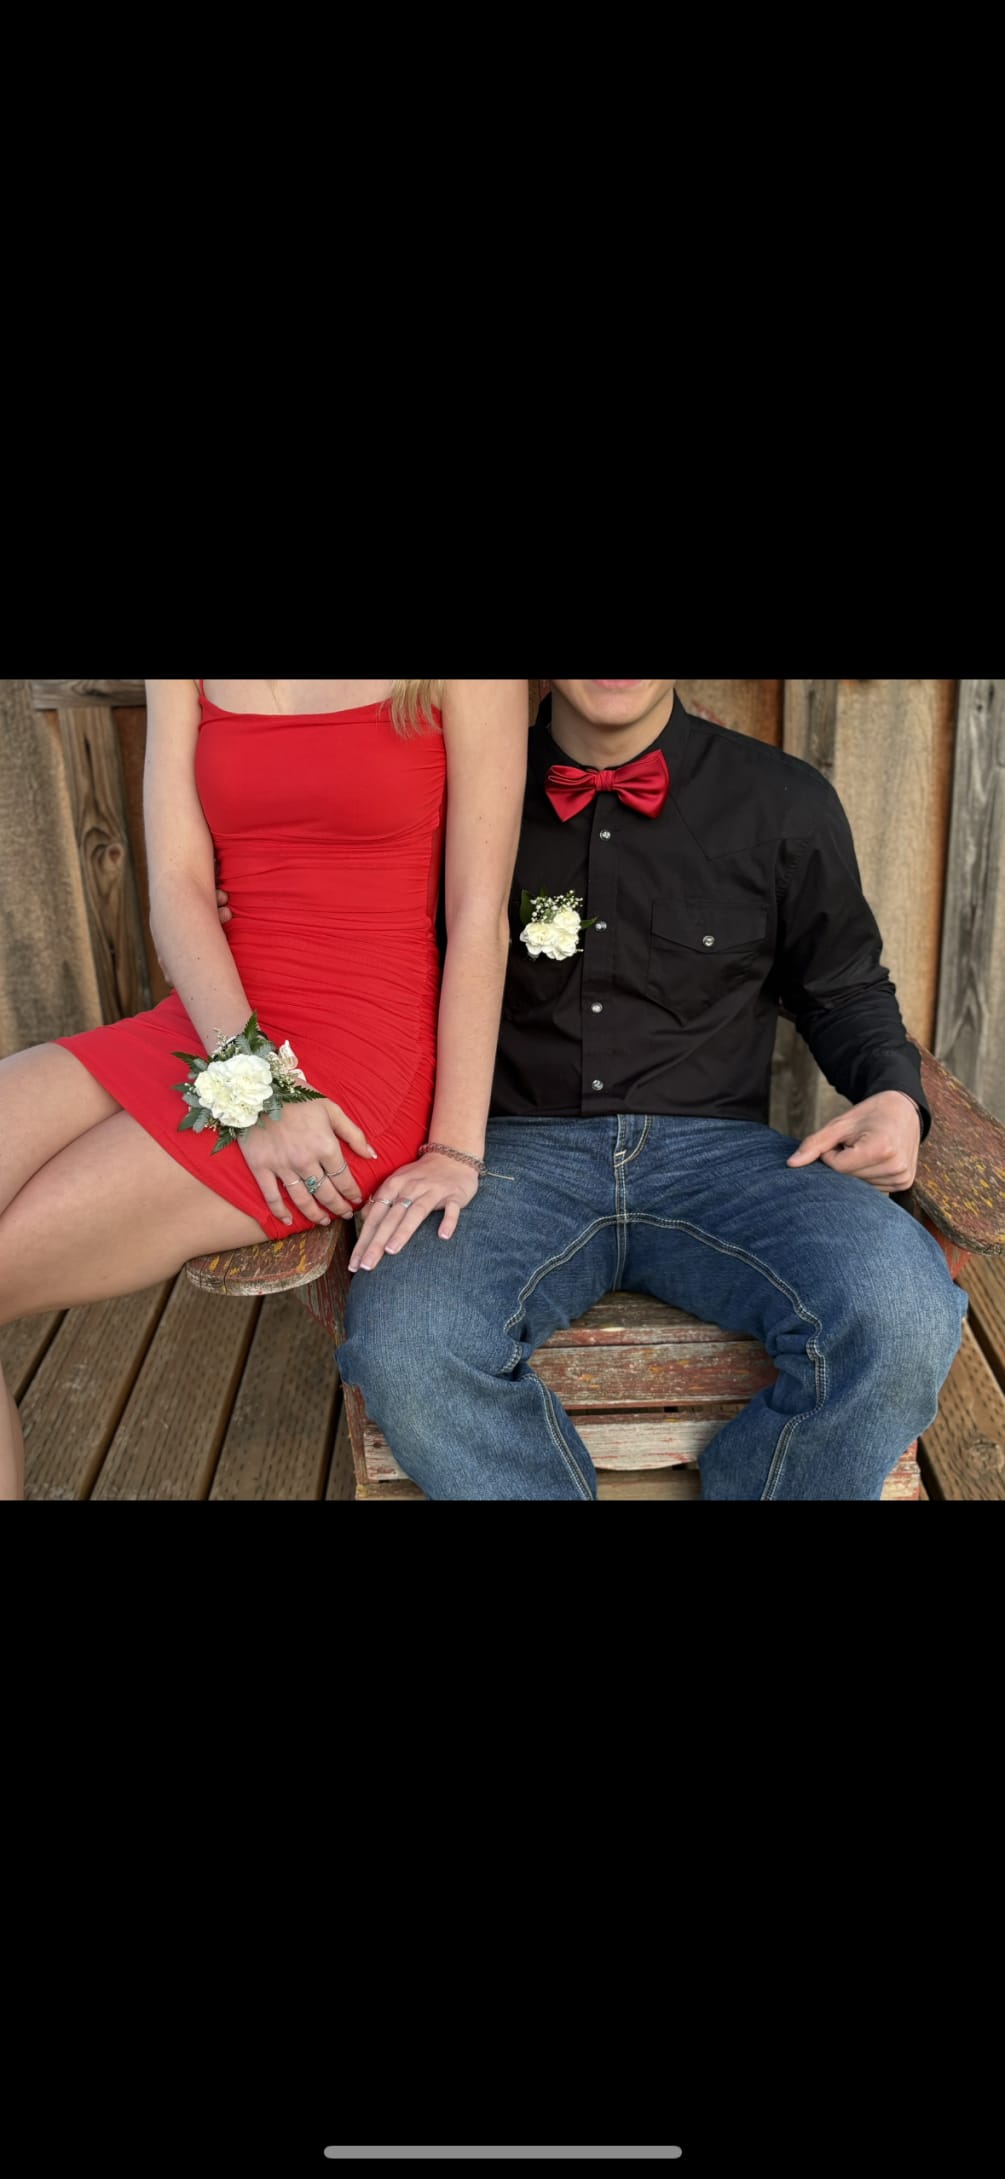 Corsage and Boutonniere Duo

*Reach out for special color request*

